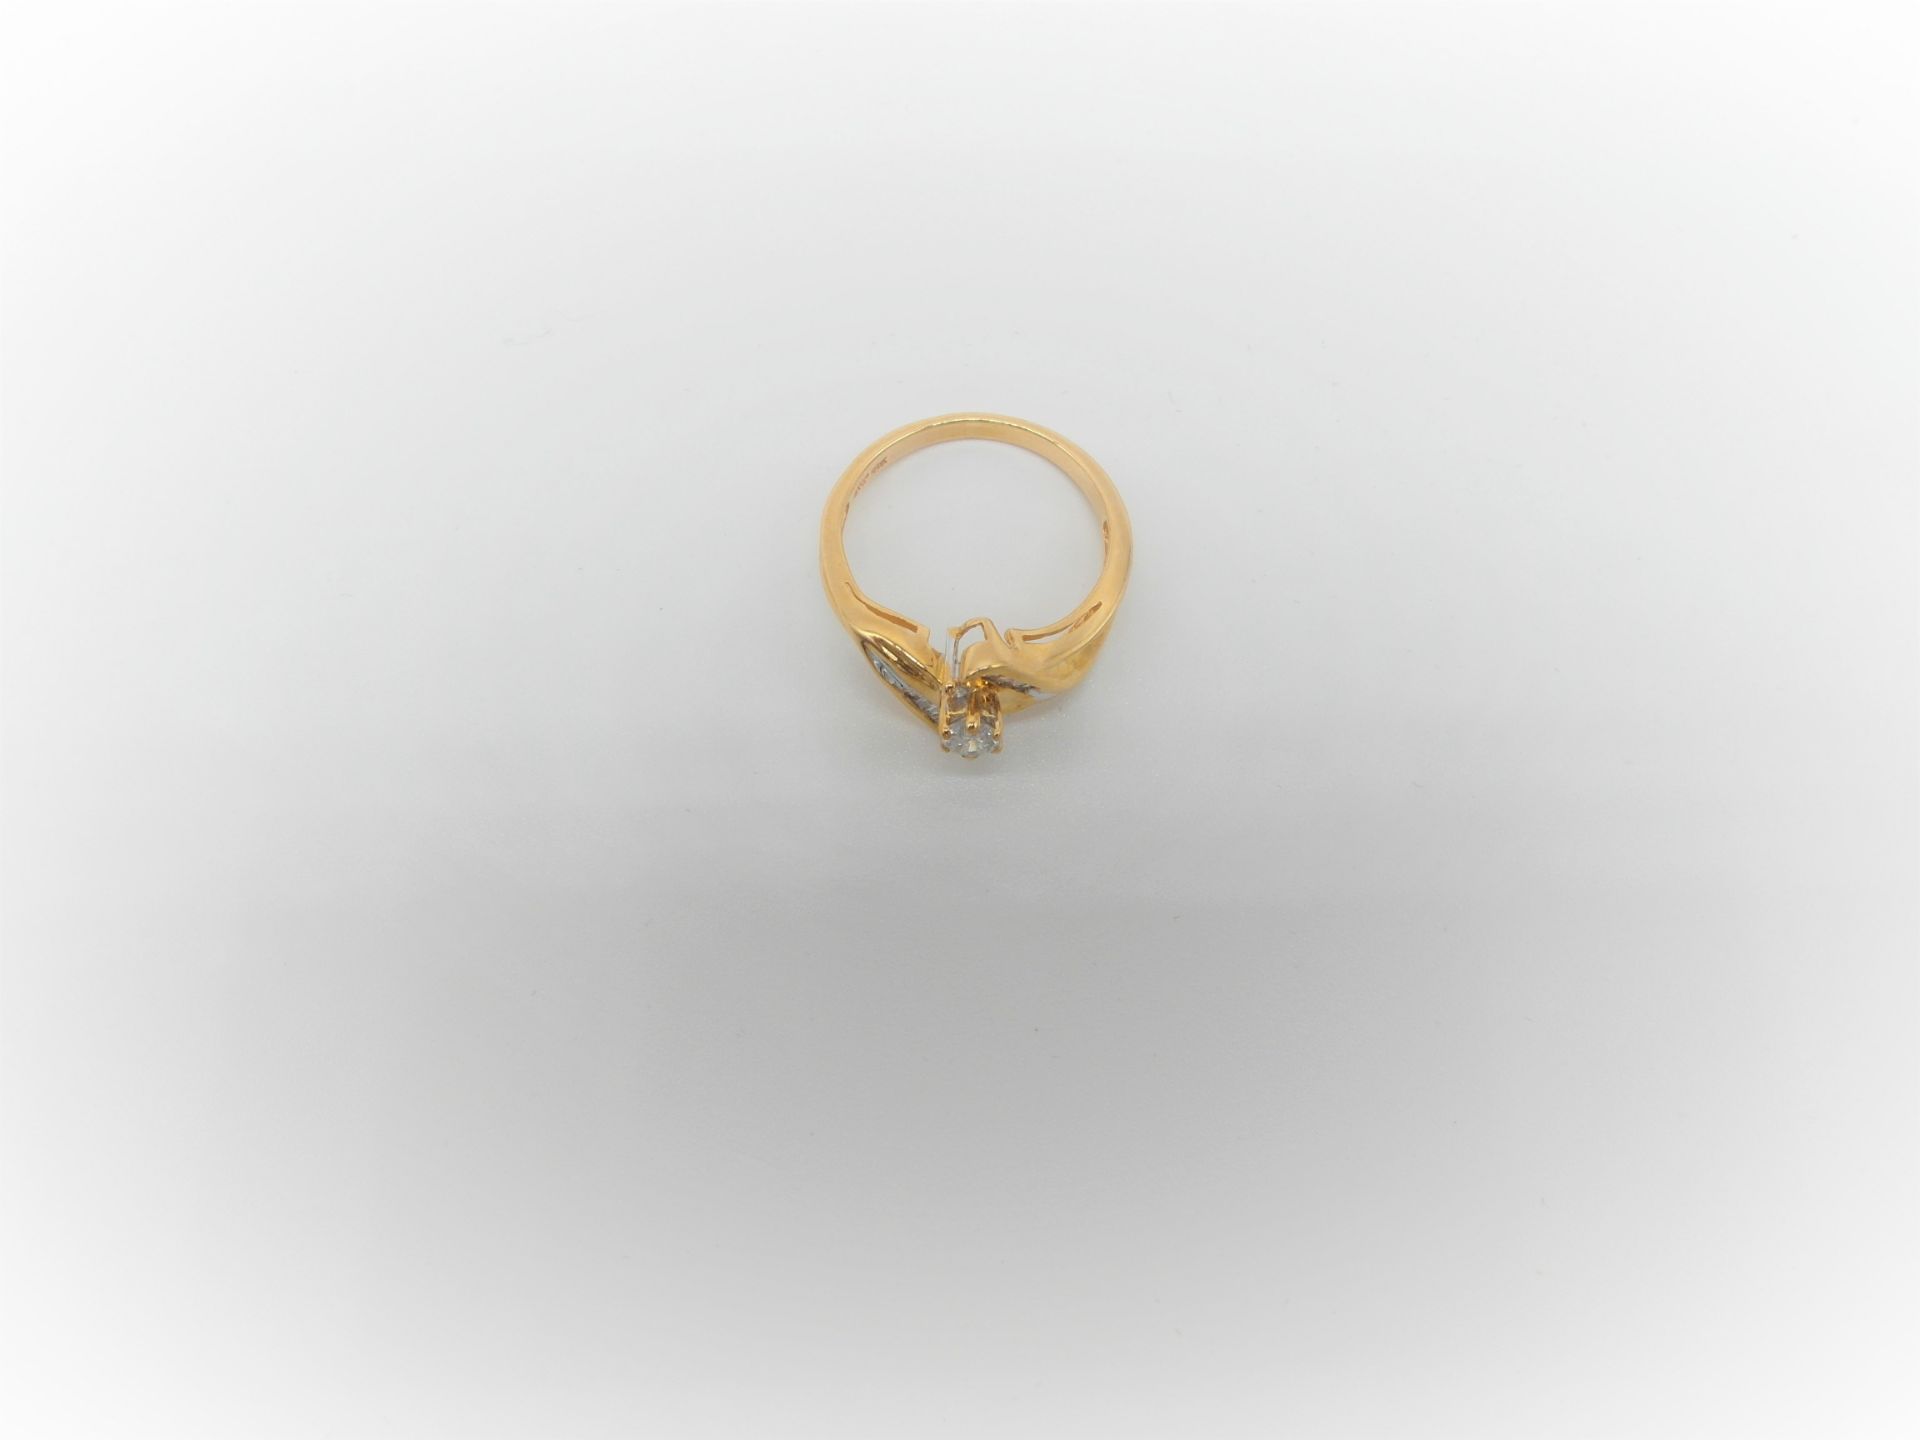 10Ct Yellow Gold Diamond Set Crossover Ring - Image 4 of 4